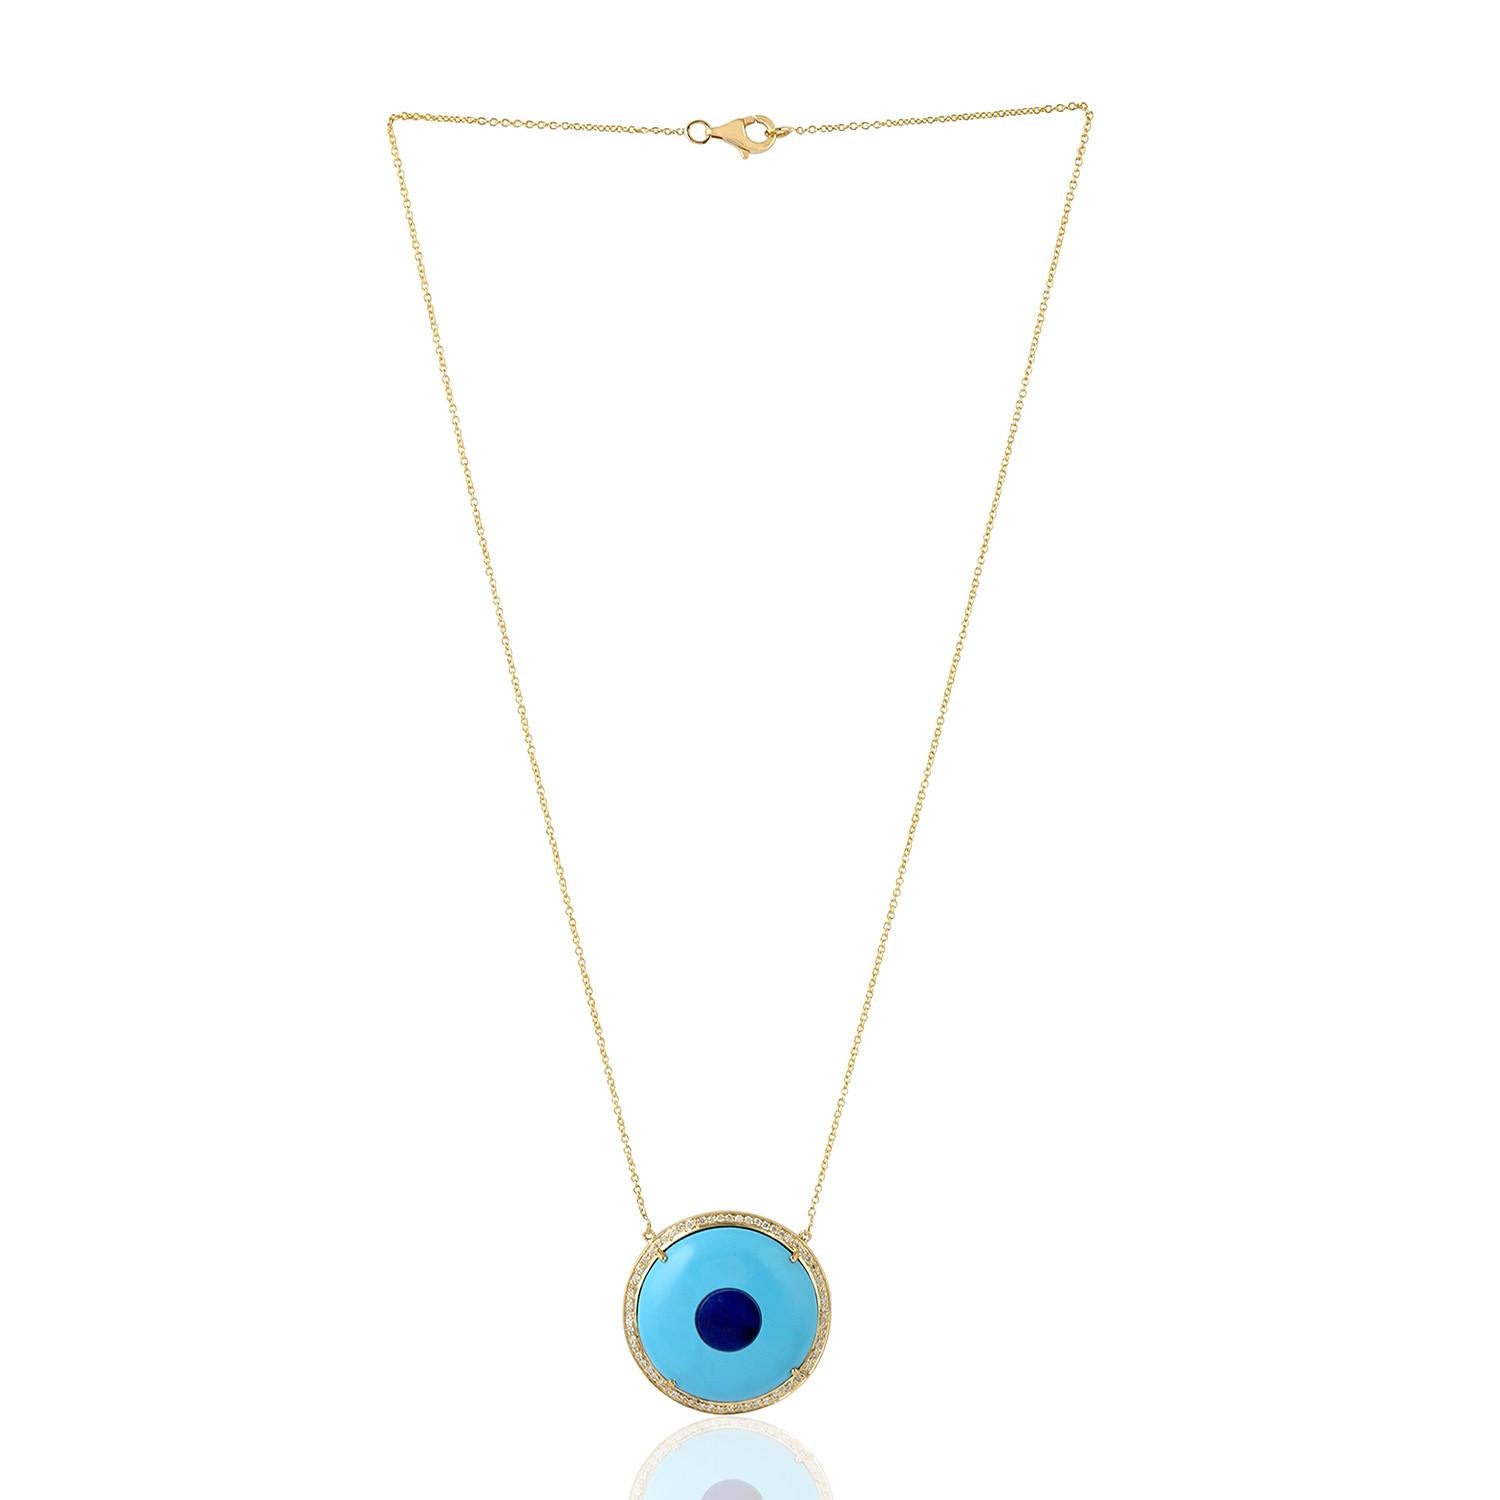 Cast from 18-karat gold, this evil eye pendant necklace is hand set with 11.11 Turquoise, 4.73 carats Lapis and .27 carats of sparkling diamonds. 

FOLLOW  MEGHNA JEWELS storefront to view the latest collection & exclusive pieces.  Meghna Jewels is